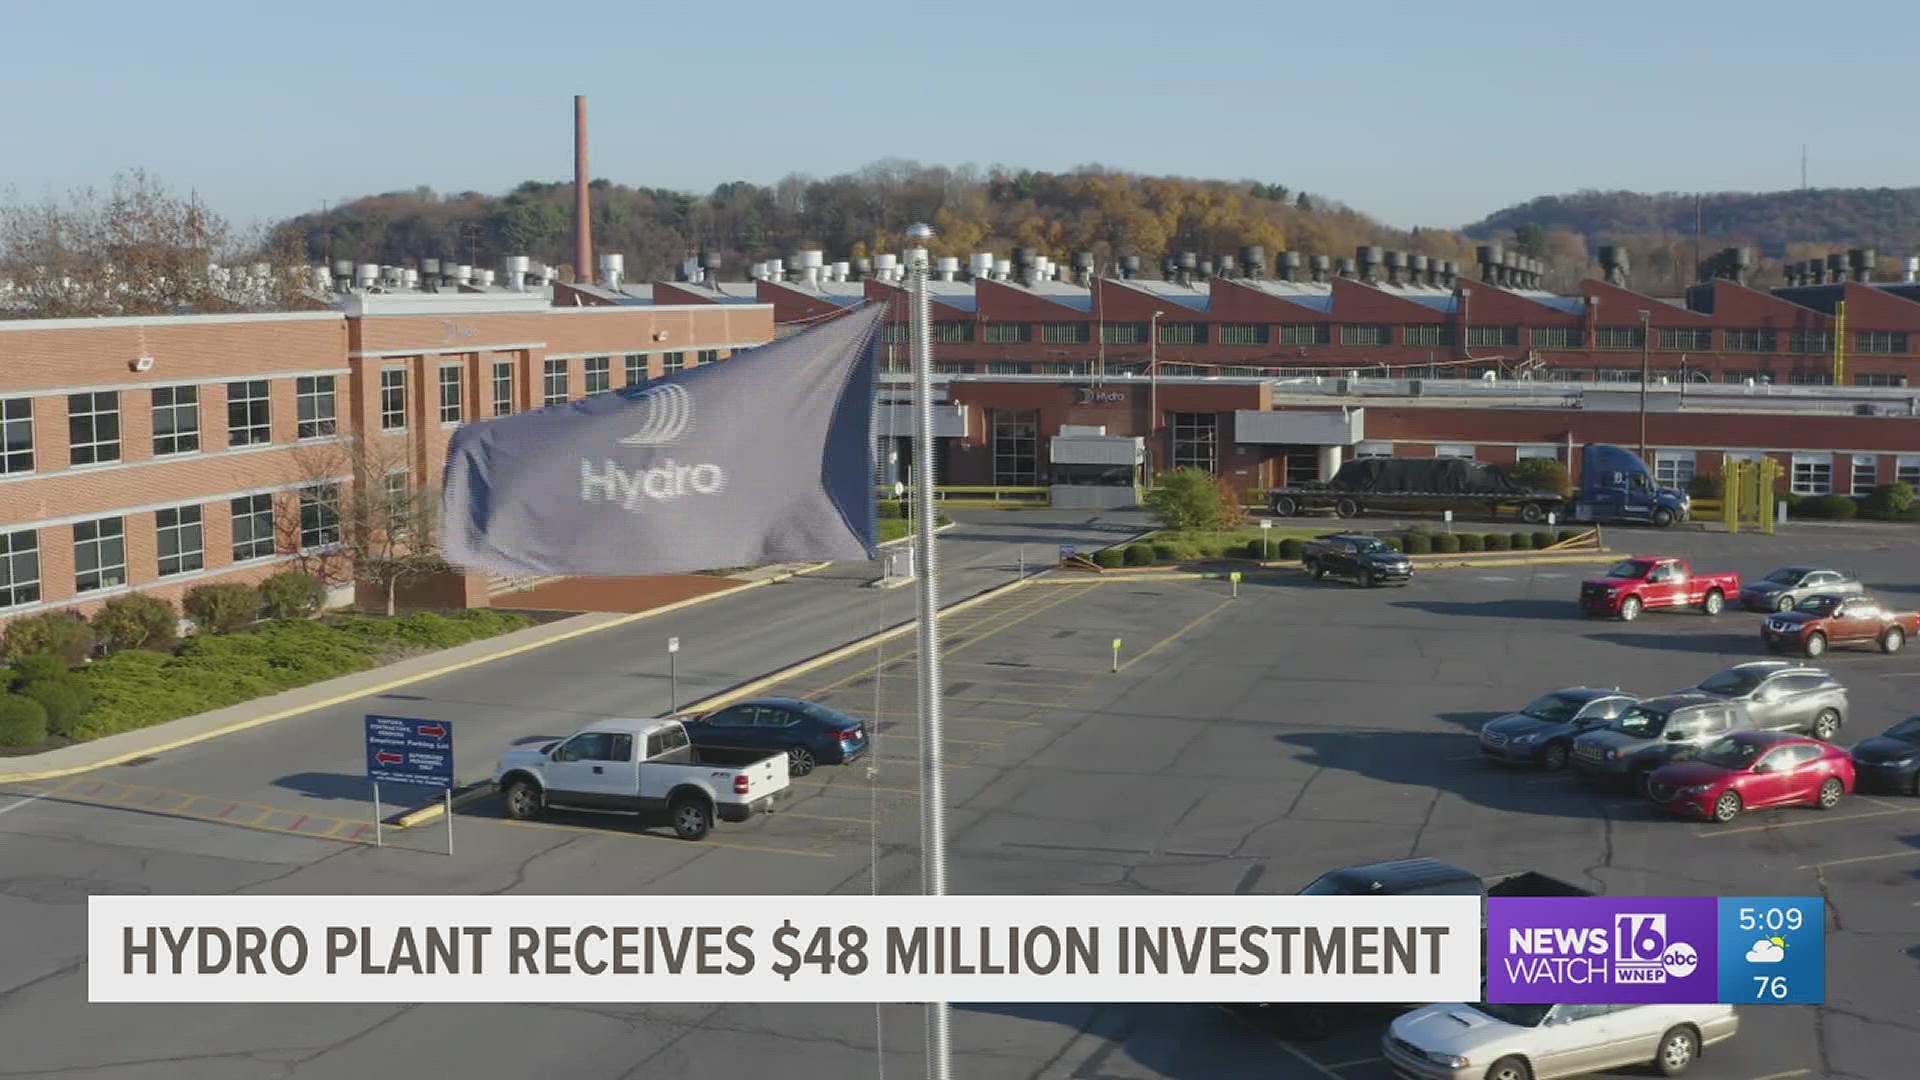 Hydro’s manufacturing plant is investing millions to modernize its facilities in Cressona.